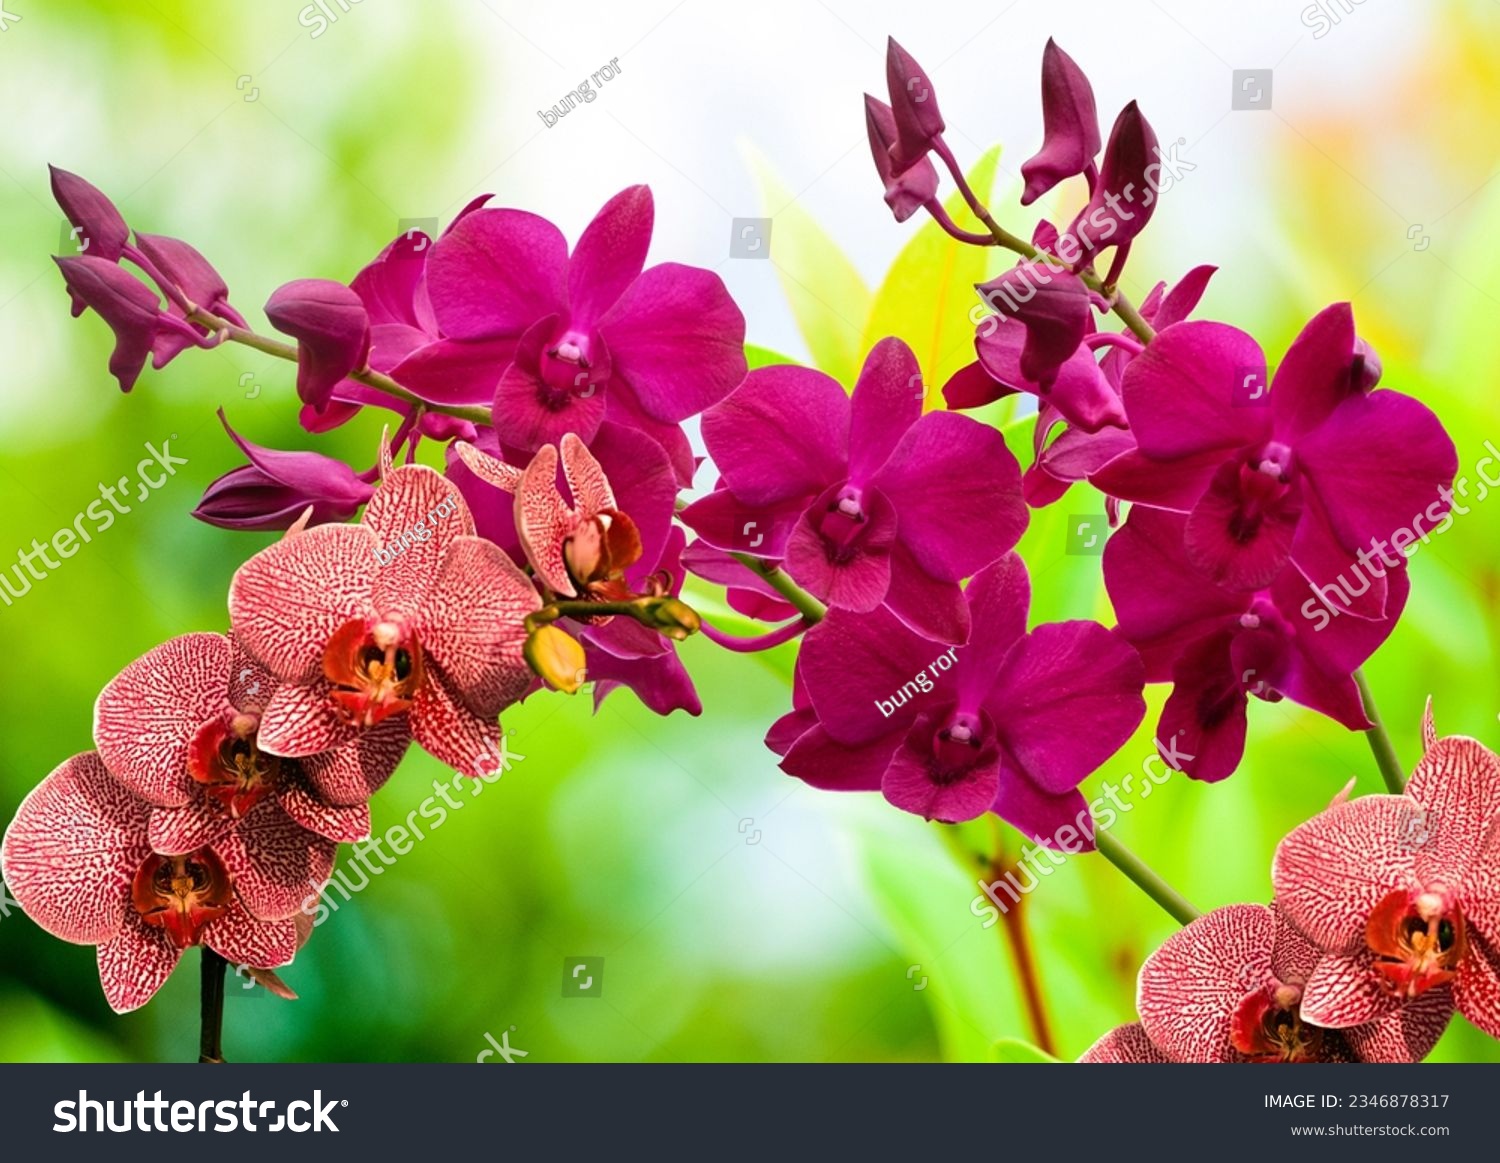 View of maroon orchids with green blurry background #2346878317